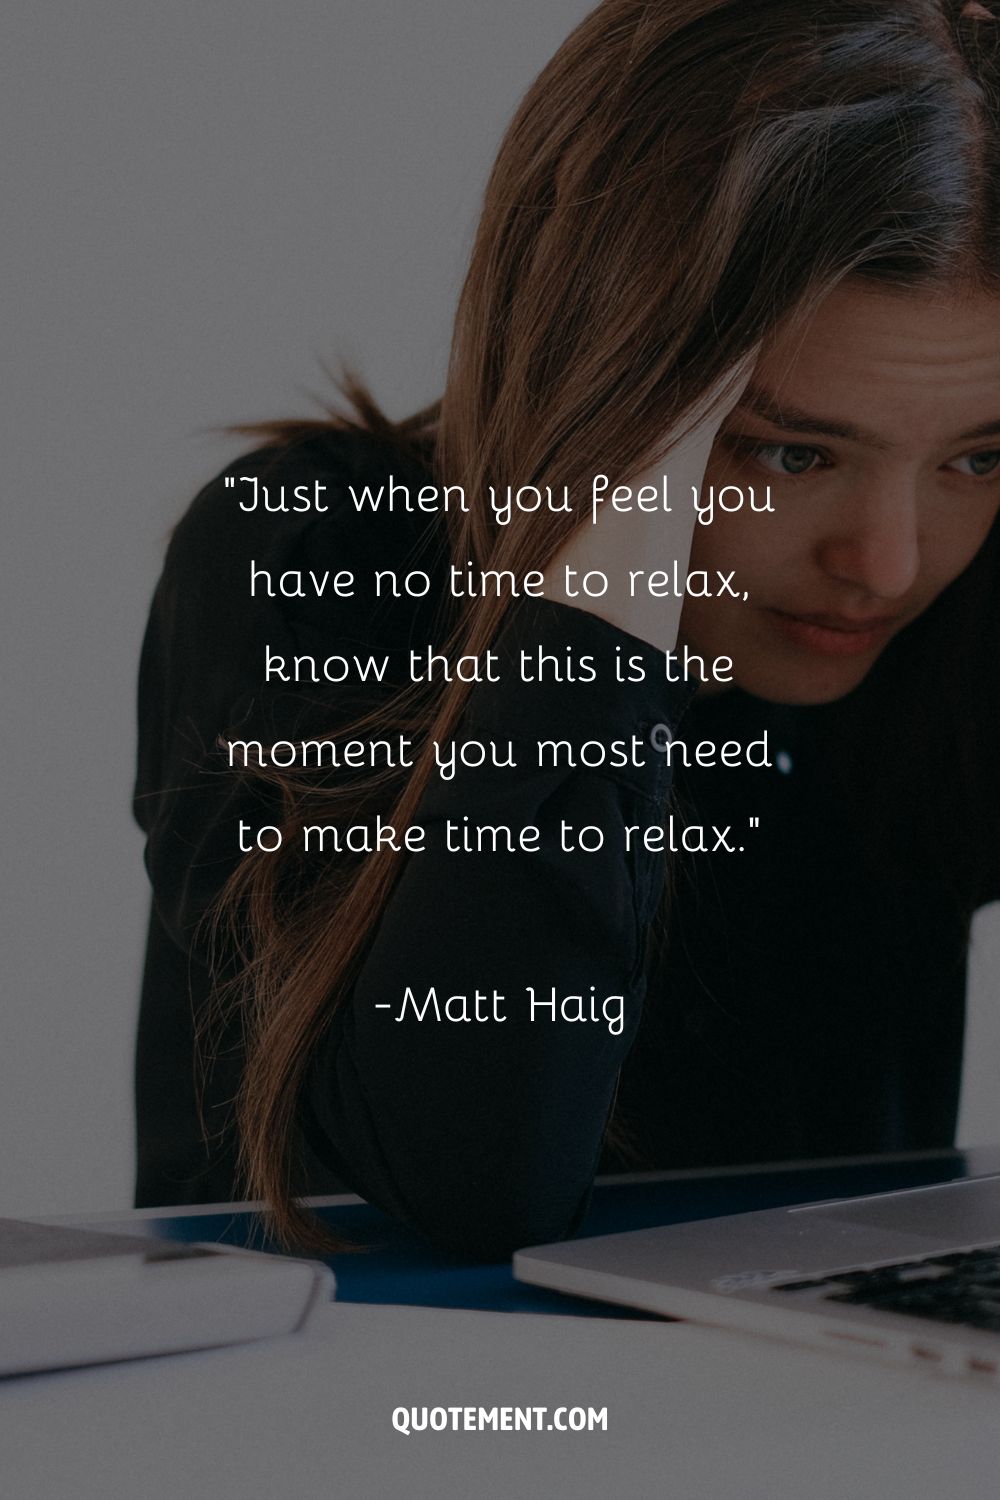 Relaxation quote about the importance of relaxing.
